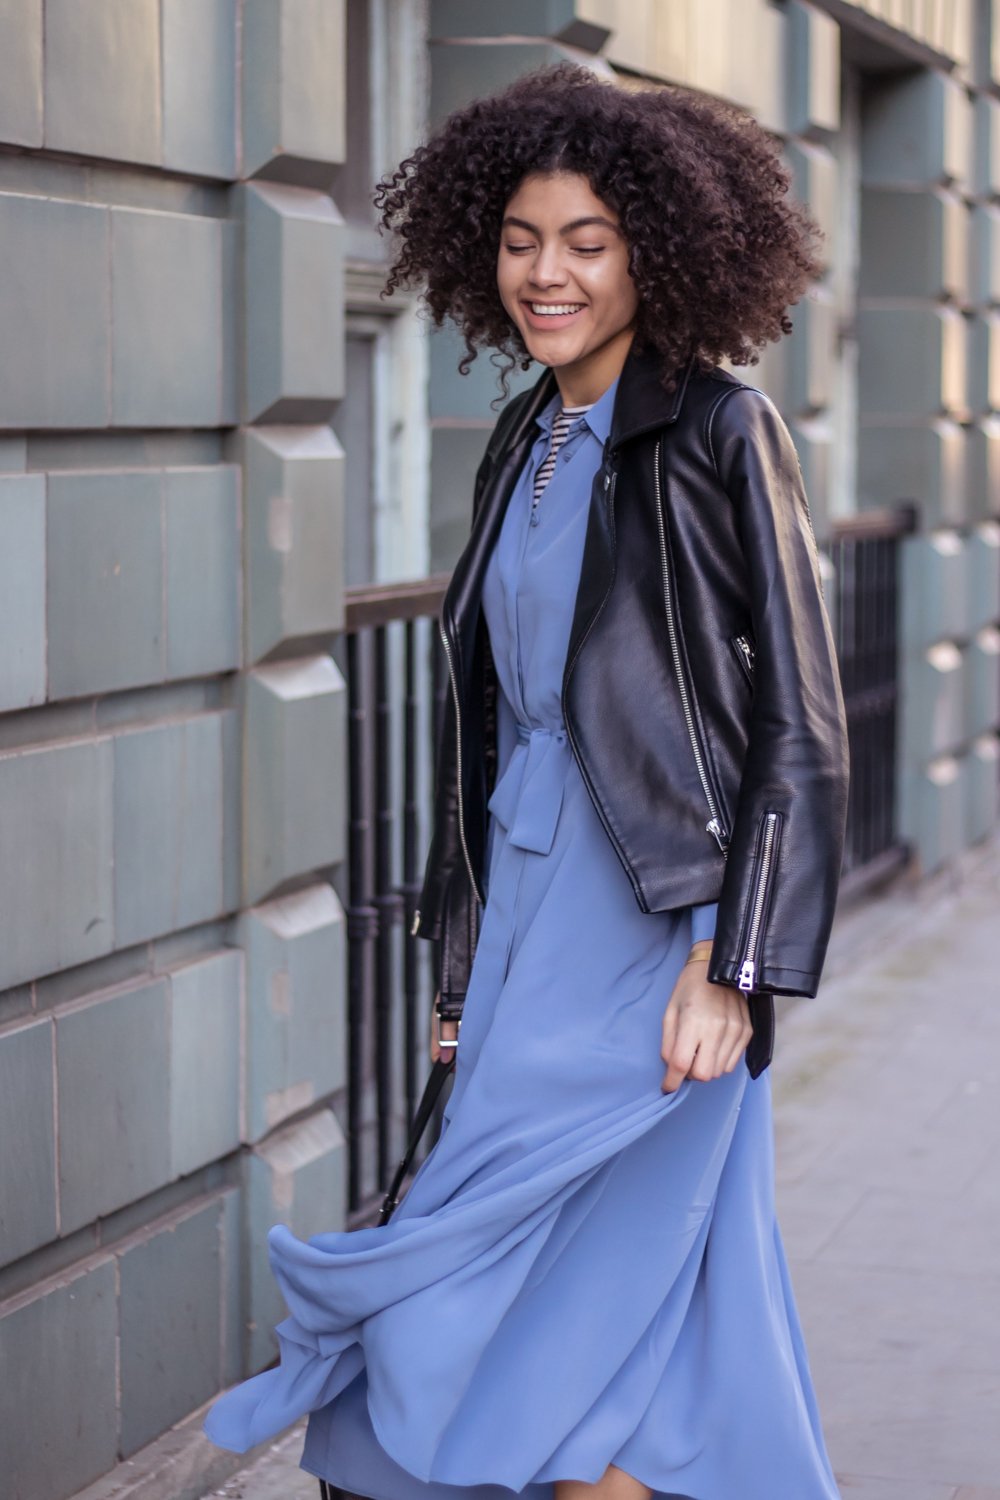 Blue Finery London shirt dress and faux leather biker jacket outfit